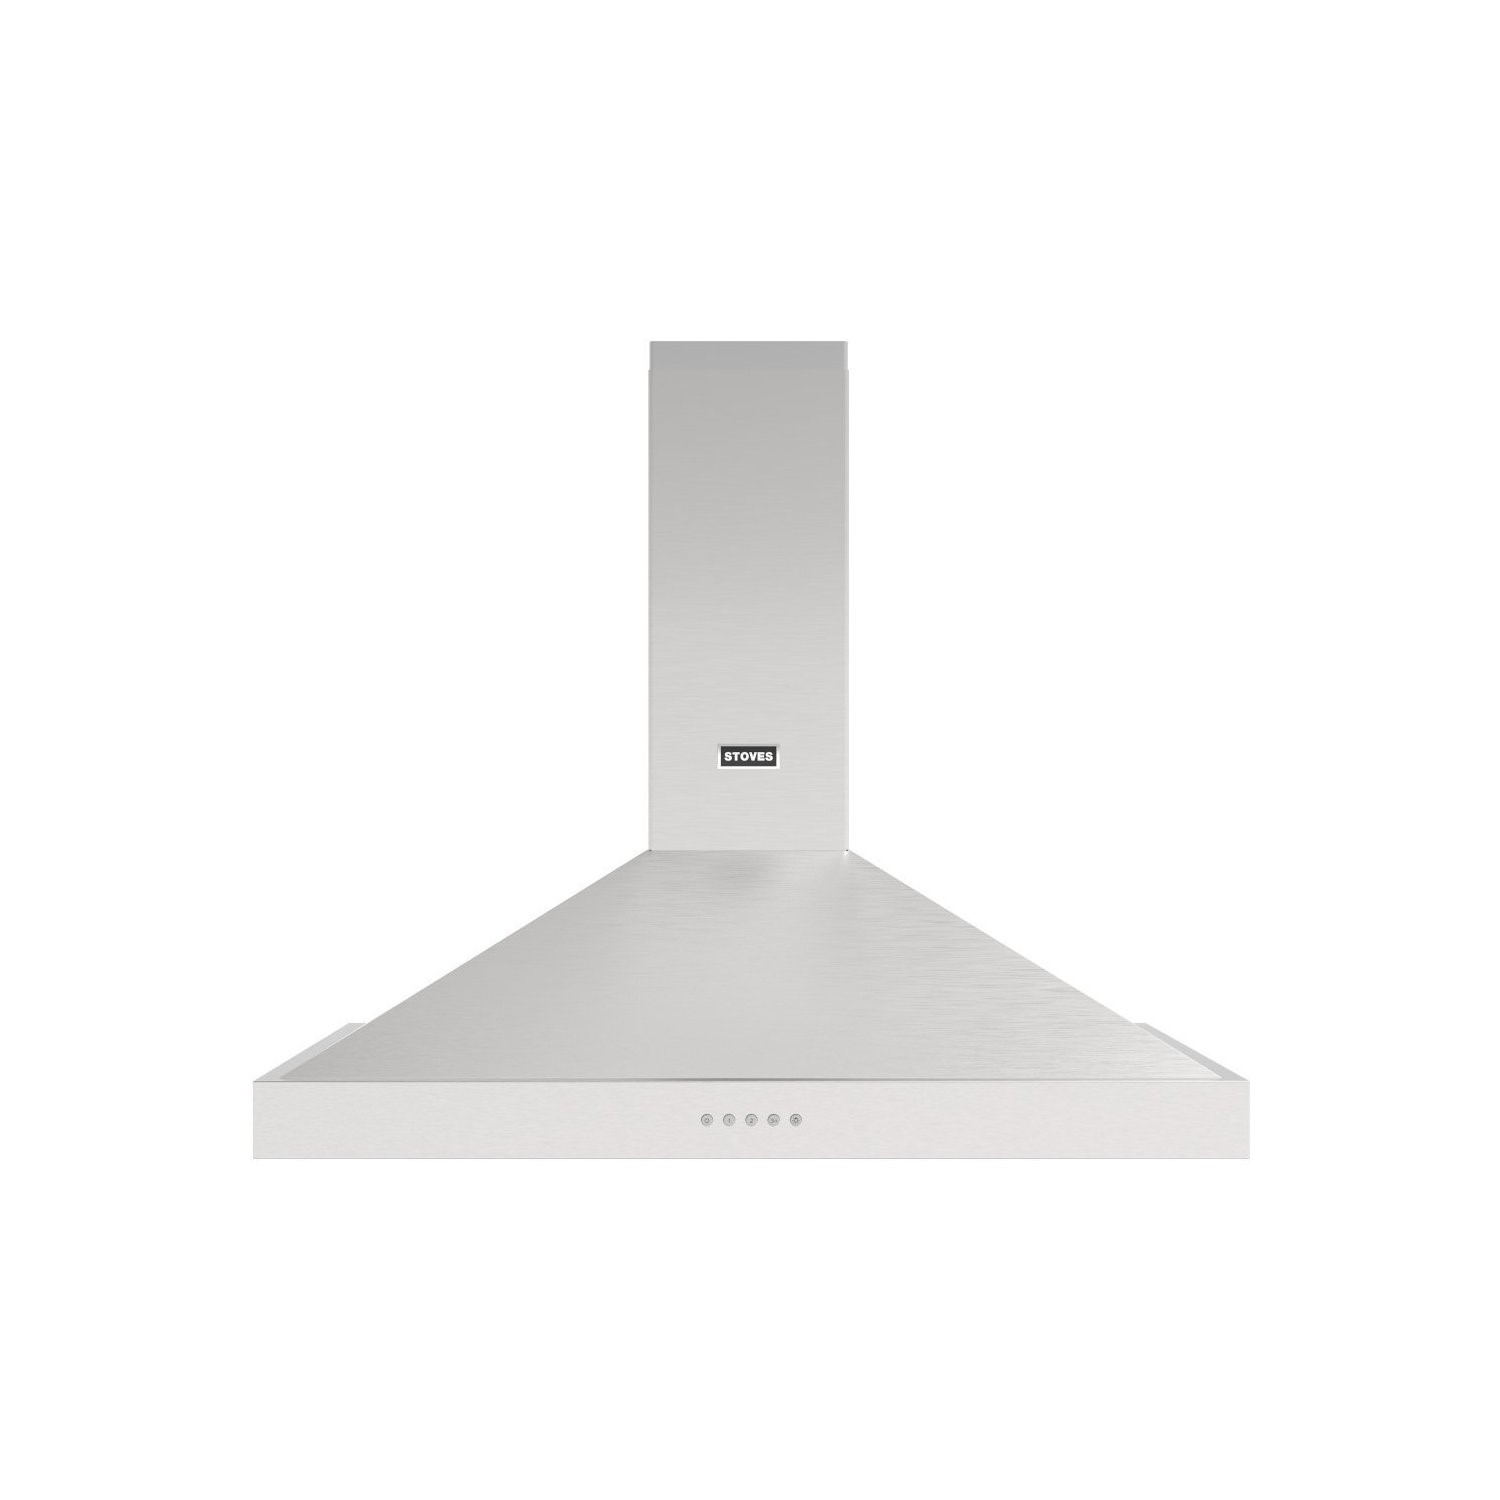 Photos - Other for Computer Stoves Sterling 100PYR 100cm Chimney Cooker Hood - Stainless Steel 4444116 